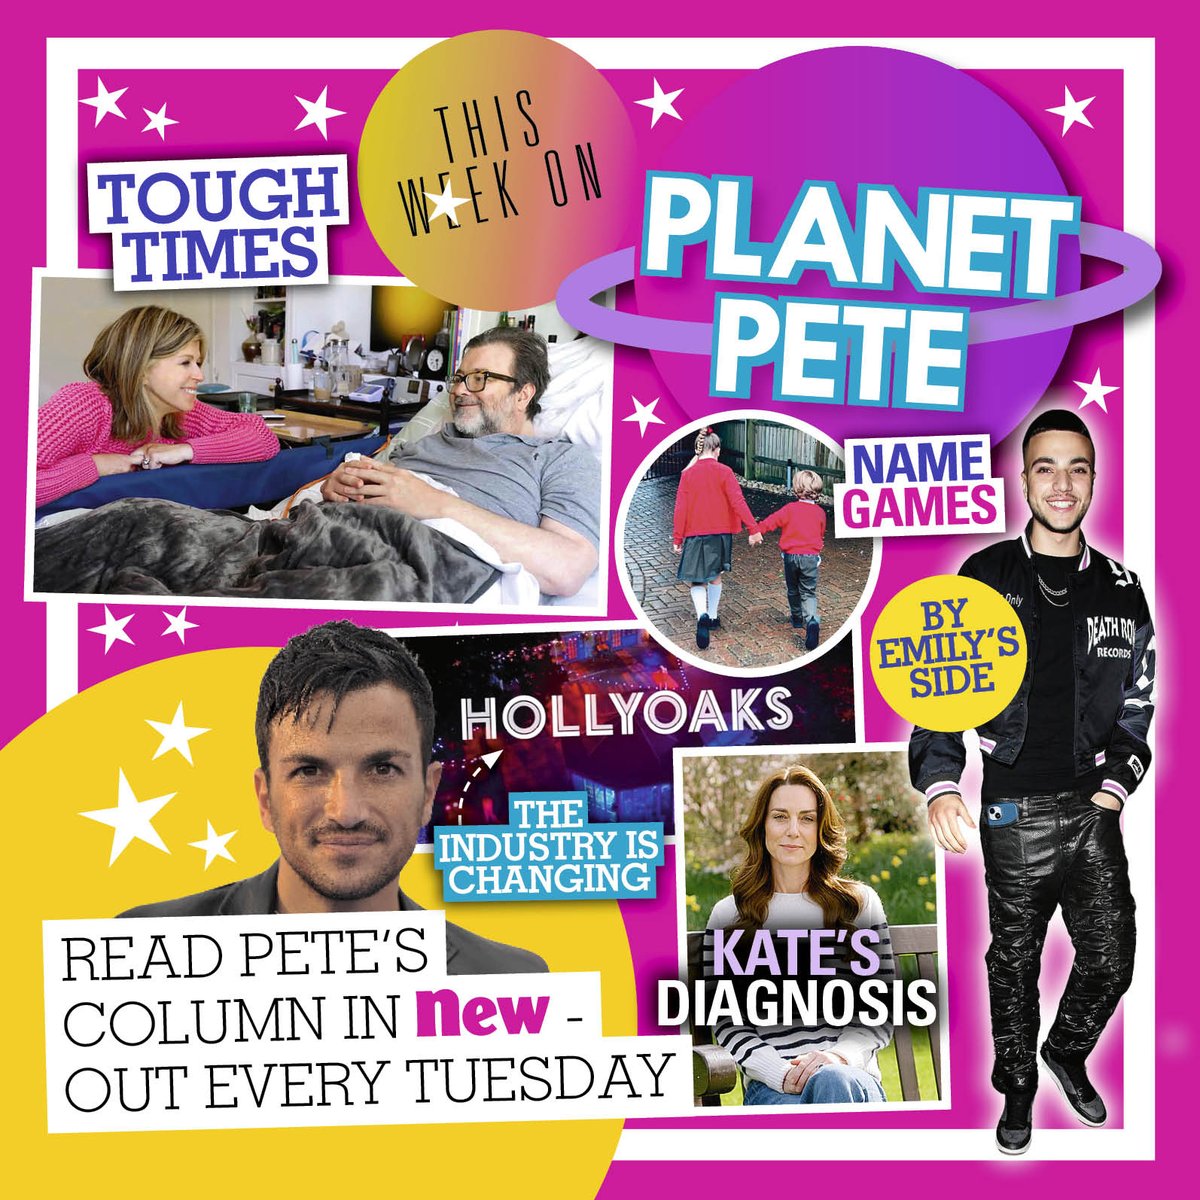 PLANET PETE! In his weekly column, singer Peter Andre chatted baby names and his excitement over becoming a dad for the fifth time, plus sends his love to the Princess of Wales. Out now.